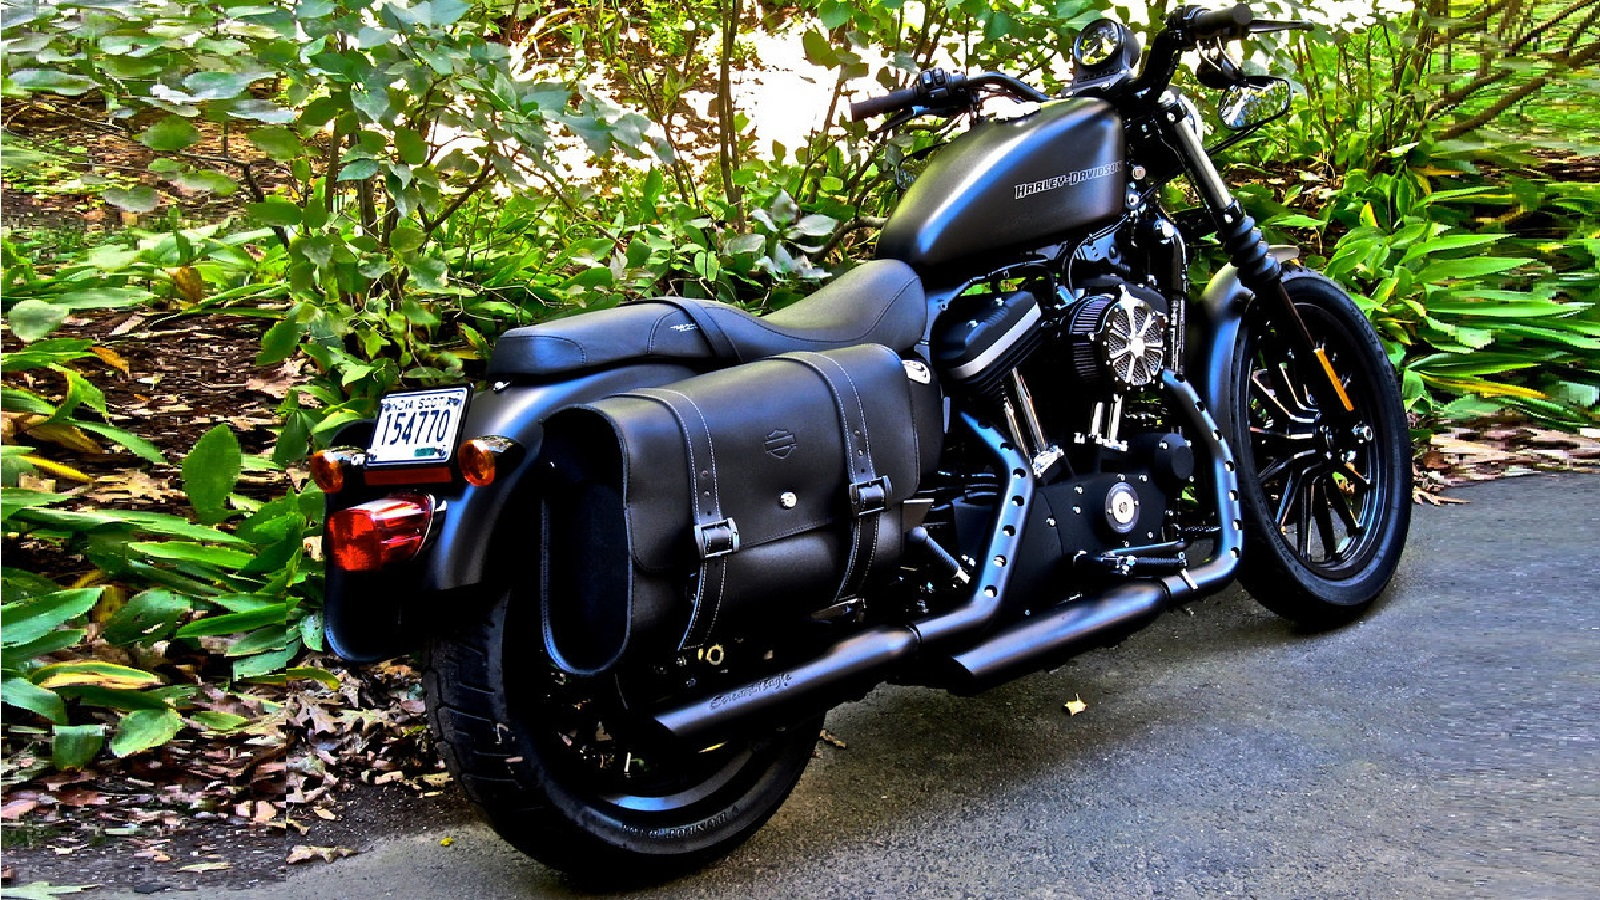 Modifying a Sportster for Touring | Hdforums